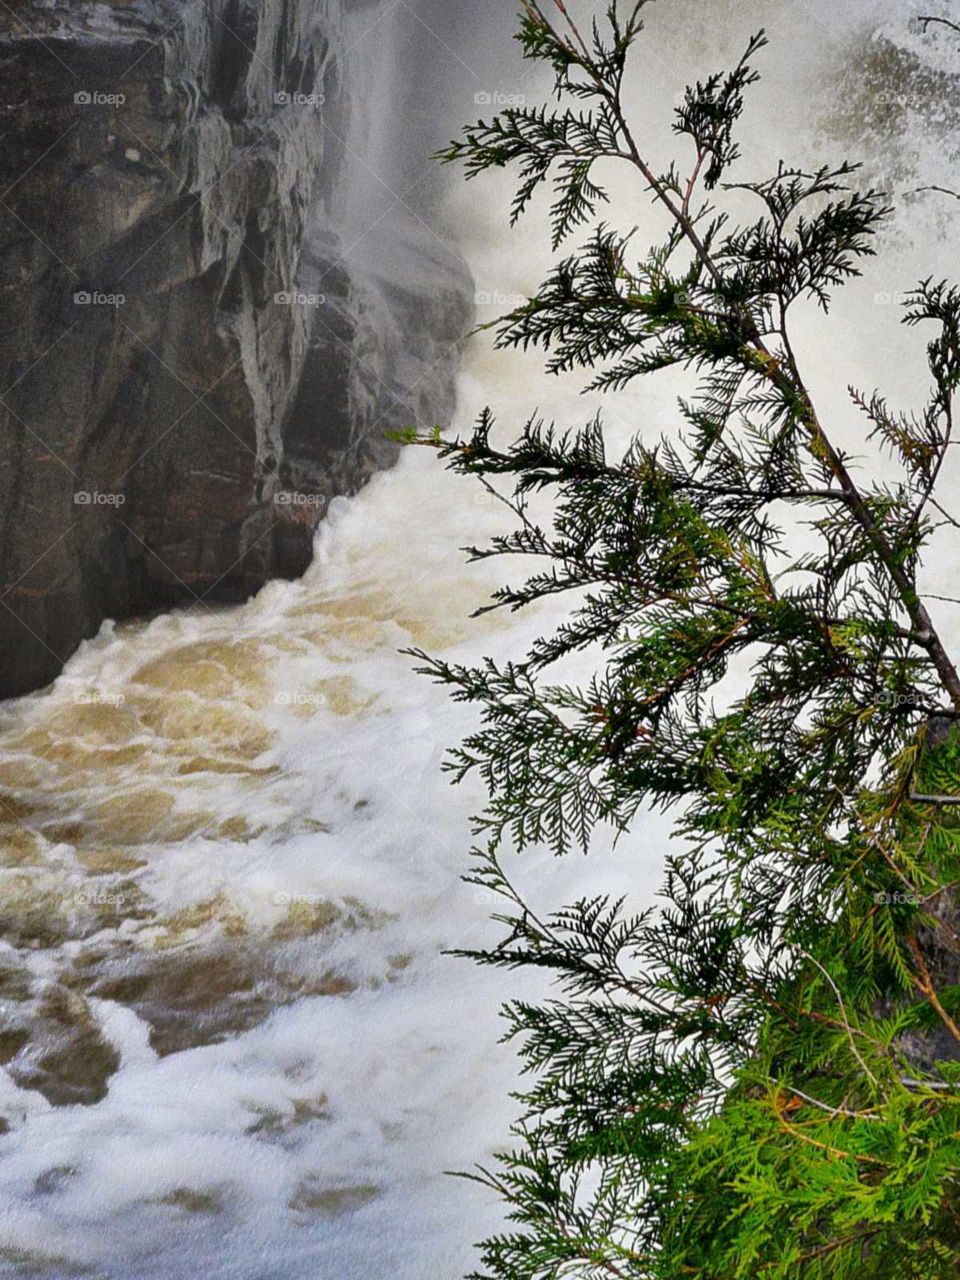 Quebec's scenic waterfall